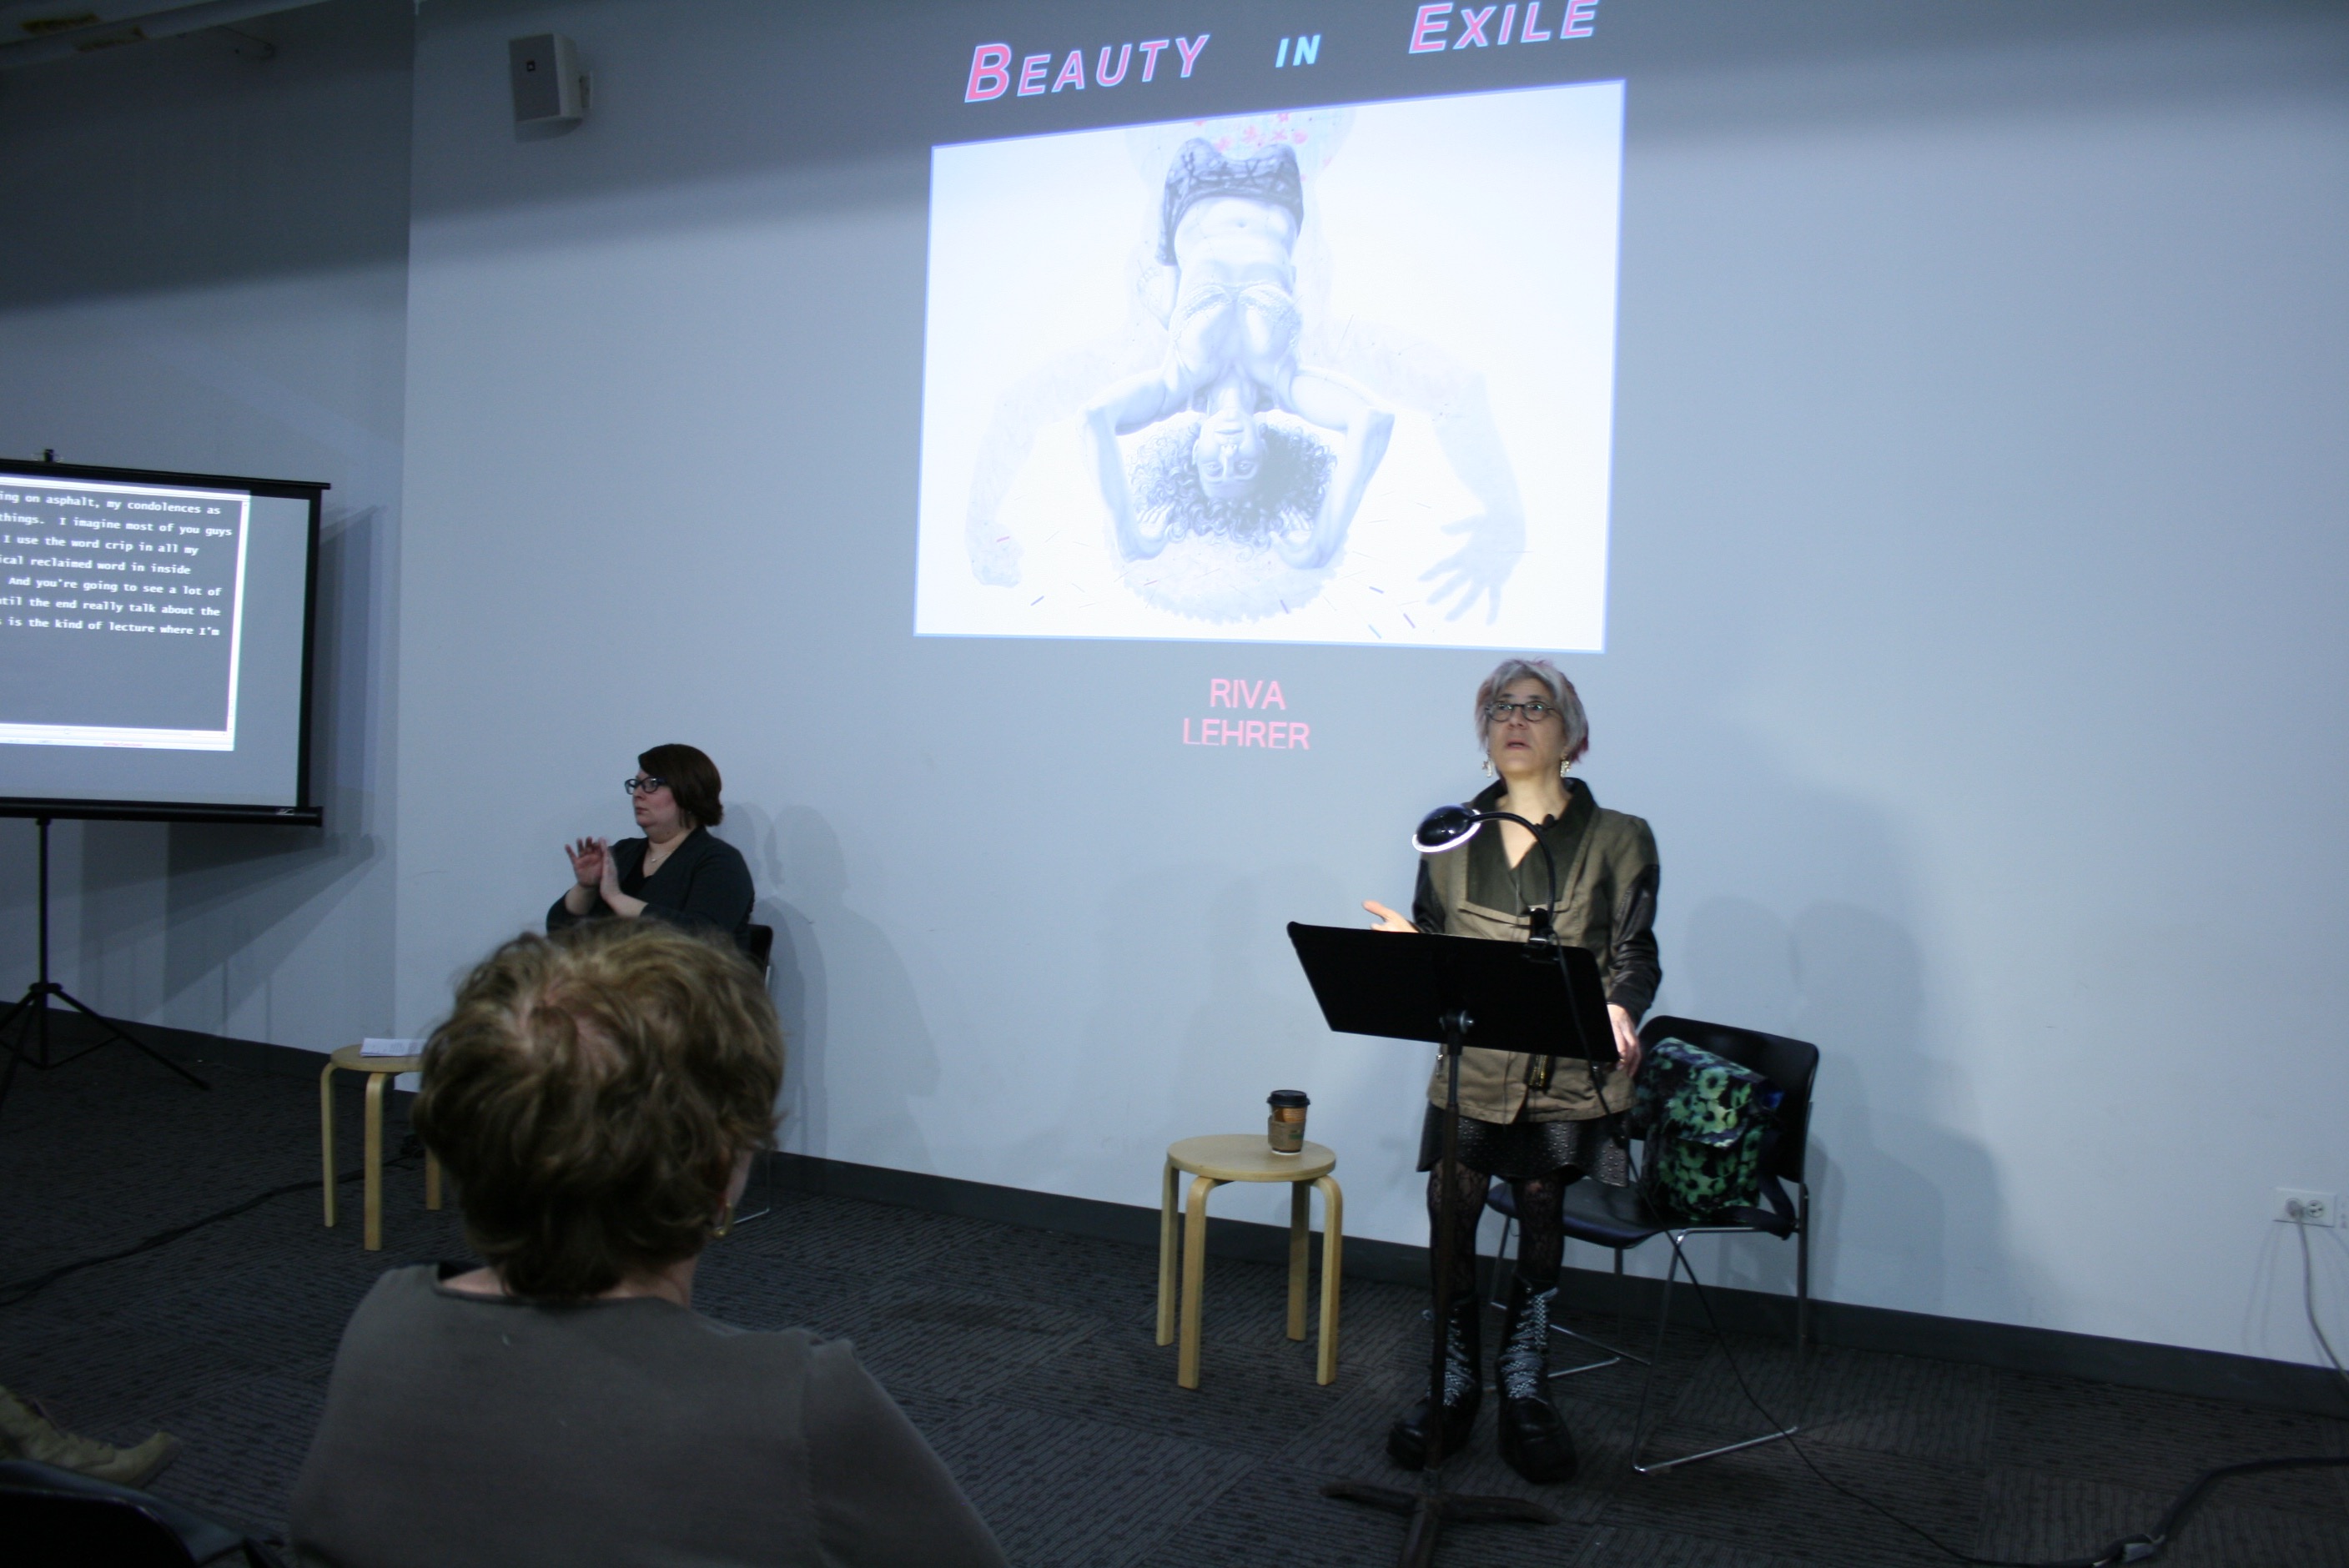 Riva giving a presentation titled Beauty in Exile.